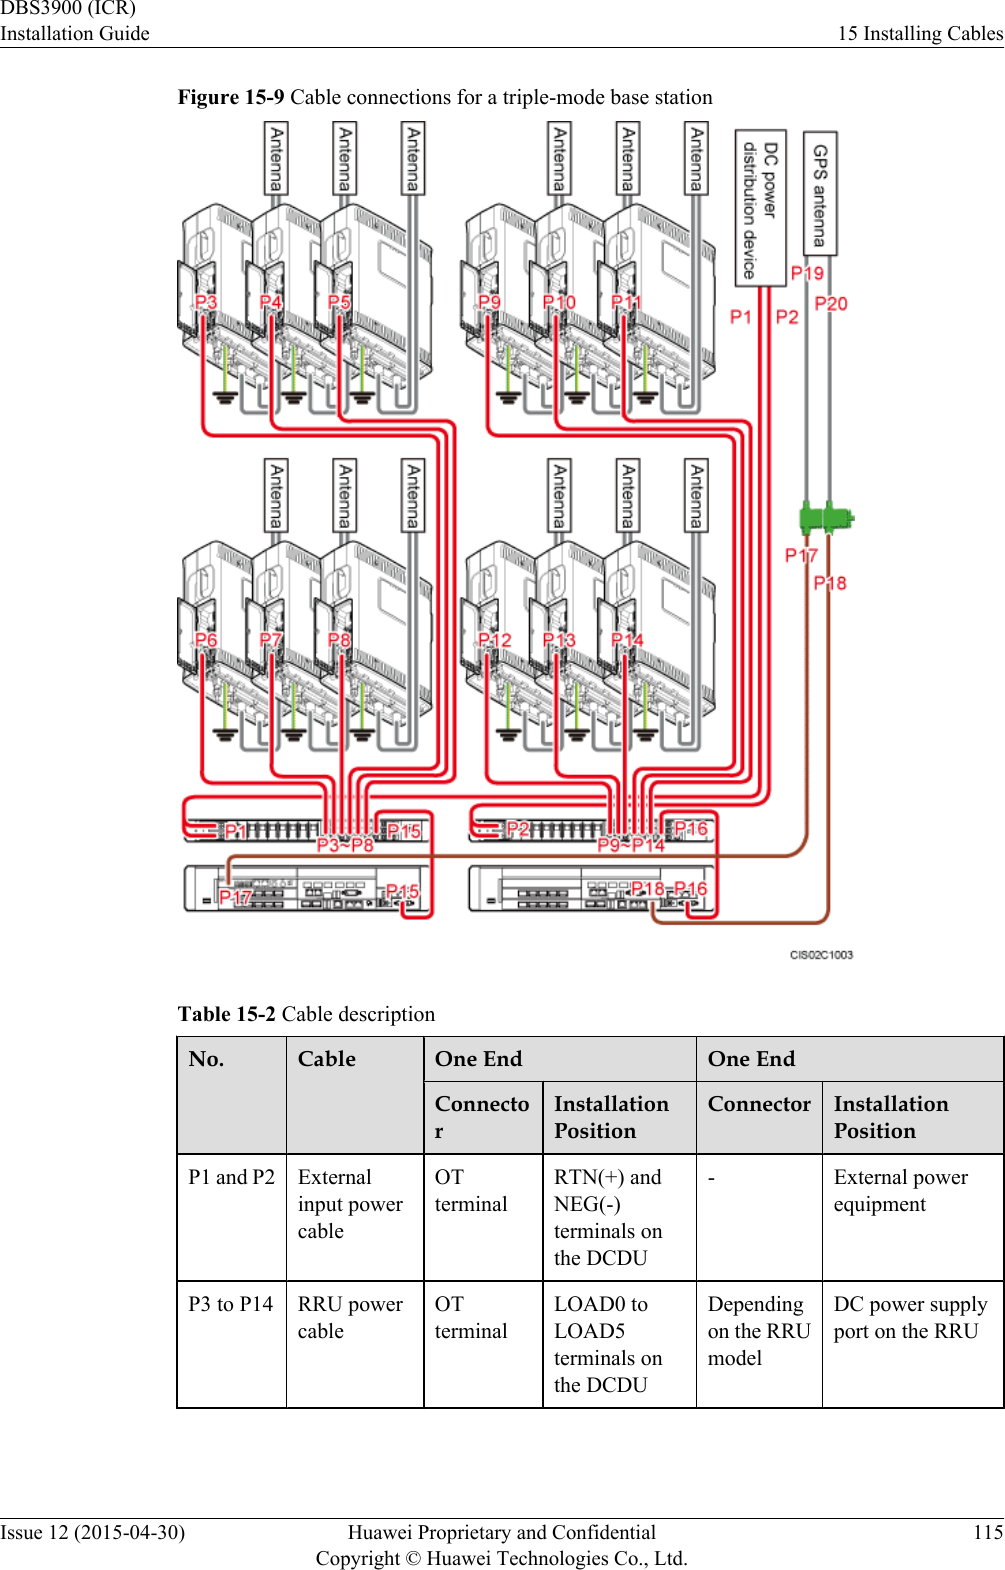 Figure 15-9 Cable connections for a triple-mode base stationTable 15-2 Cable descriptionNo. Cable One End One EndConnectorInstallationPositionConnector InstallationPositionP1 and P2 Externalinput powercableOTterminalRTN(+) andNEG(-)terminals onthe DCDU- External powerequipmentP3 to P14 RRU powercableOTterminalLOAD0 toLOAD5terminals onthe DCDUDependingon the RRUmodelDC power supplyport on the RRUDBS3900 (ICR)Installation Guide 15 Installing CablesIssue 12 (2015-04-30) Huawei Proprietary and ConfidentialCopyright © Huawei Technologies Co., Ltd.115